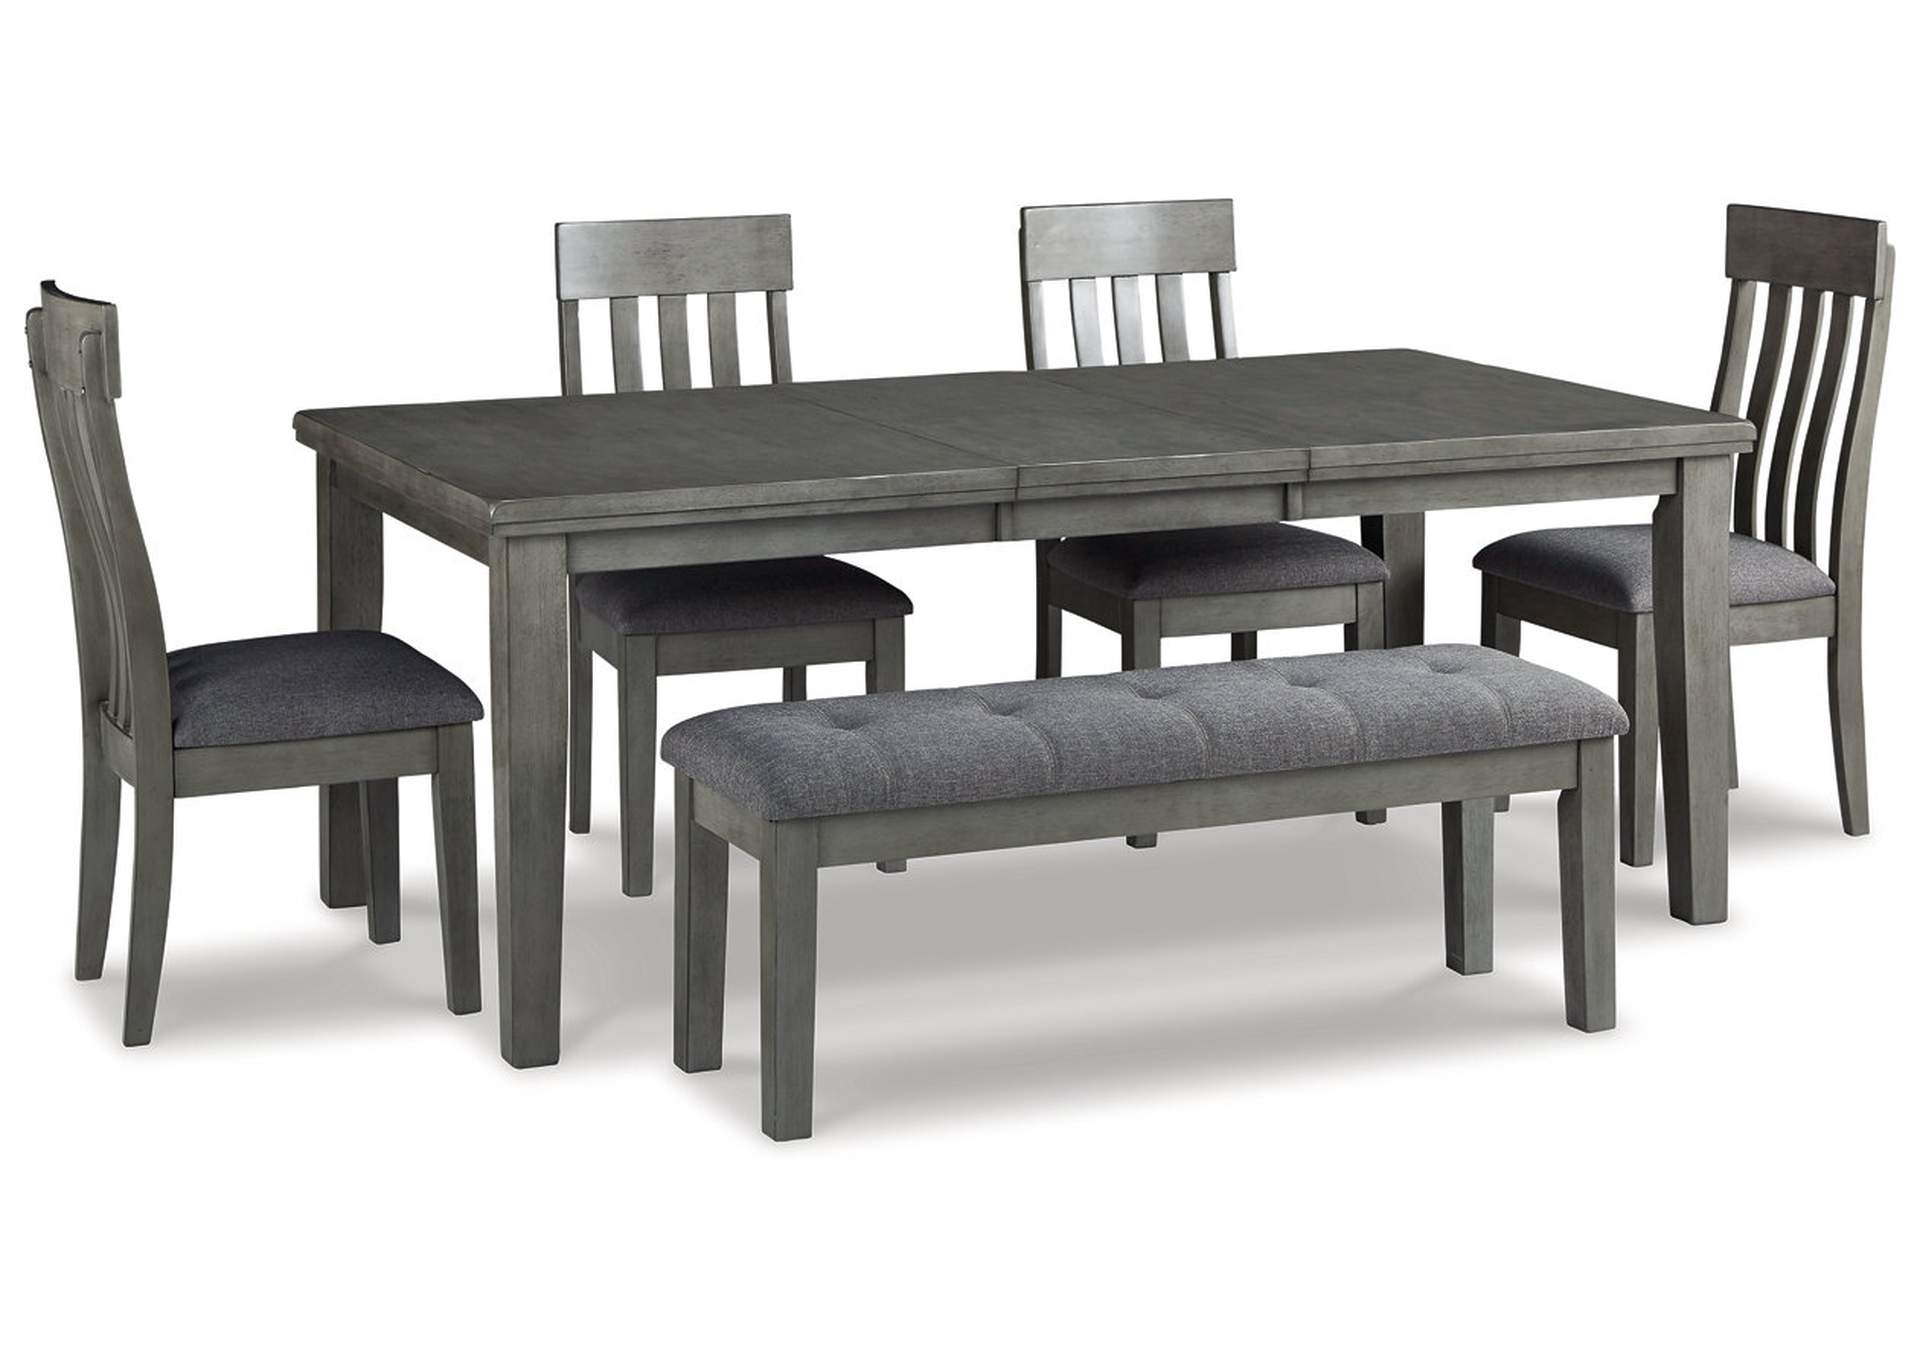 Hallanden Dining Table, 4 Chairs, and Bench,Signature Design By Ashley